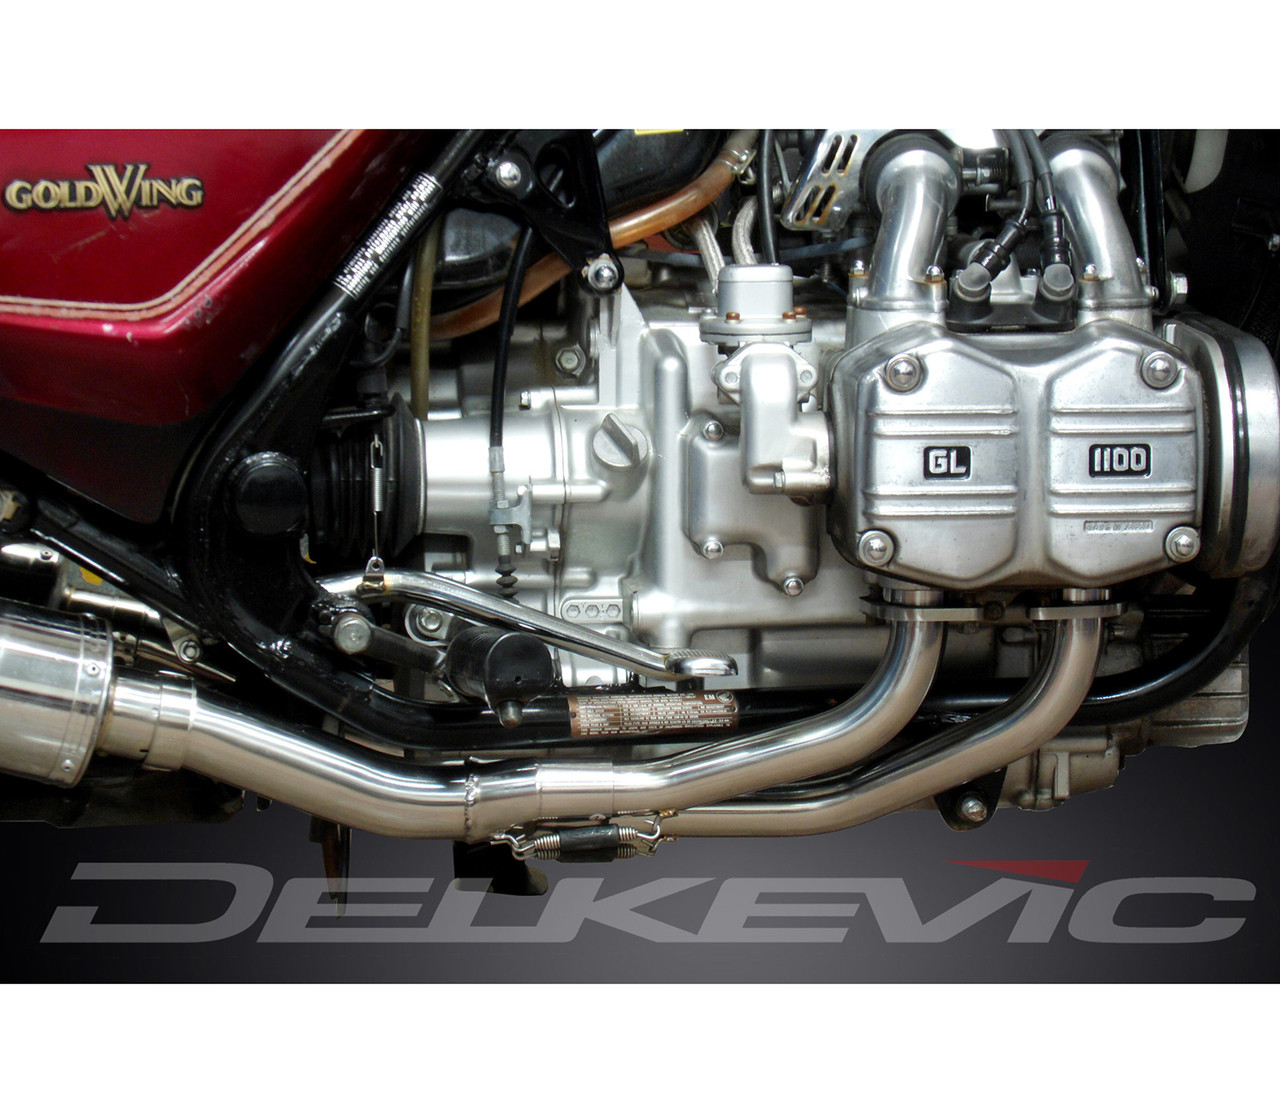 Delkevic 4into2 Stainless Steel Headers Honda GL1000/1100 Gold Wing